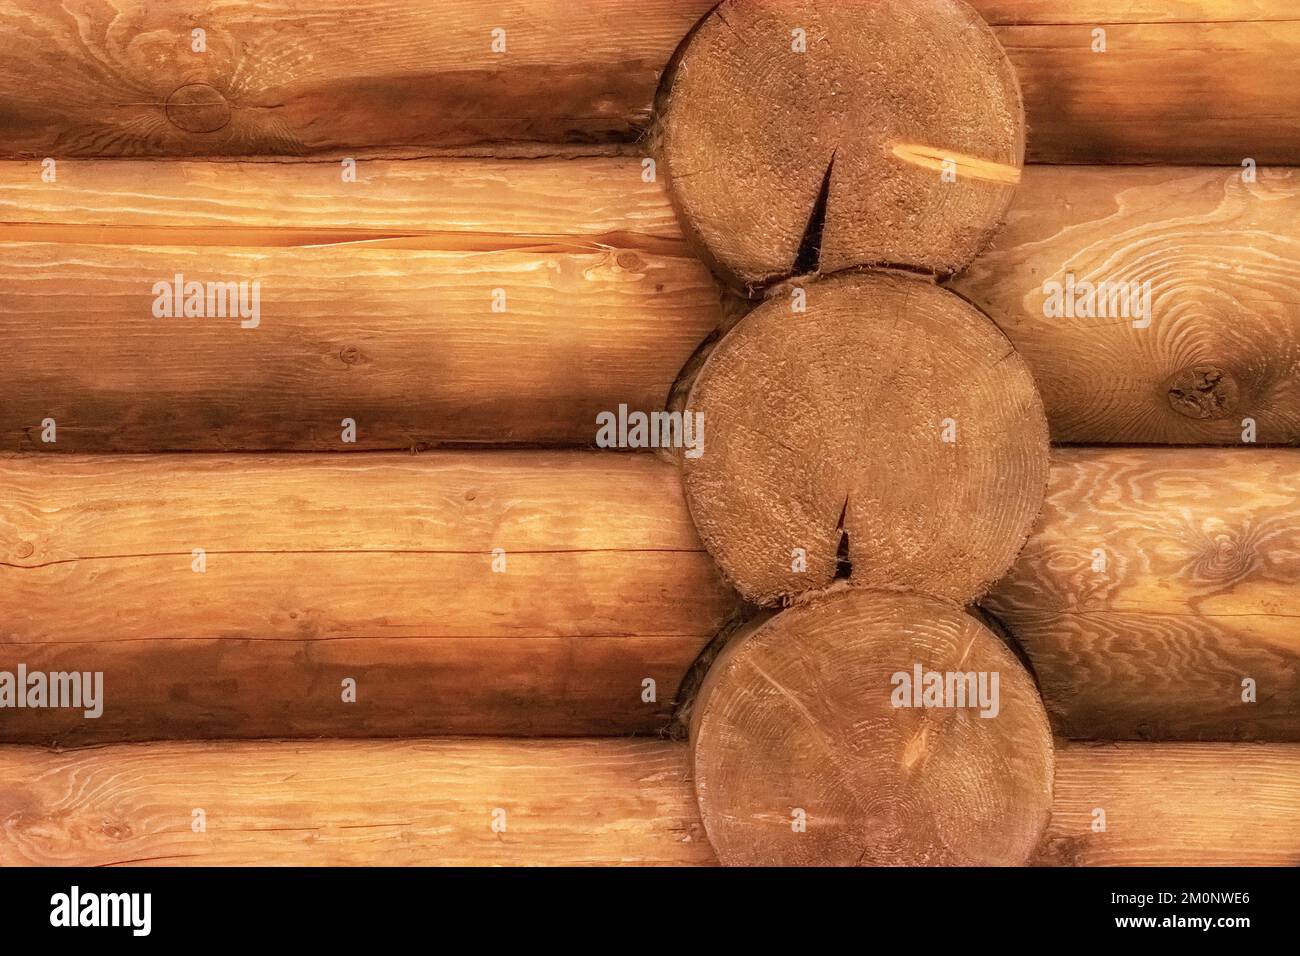 Fragment of a wall made of round wooden logs for use as an abstract background and texture. Stock Photo